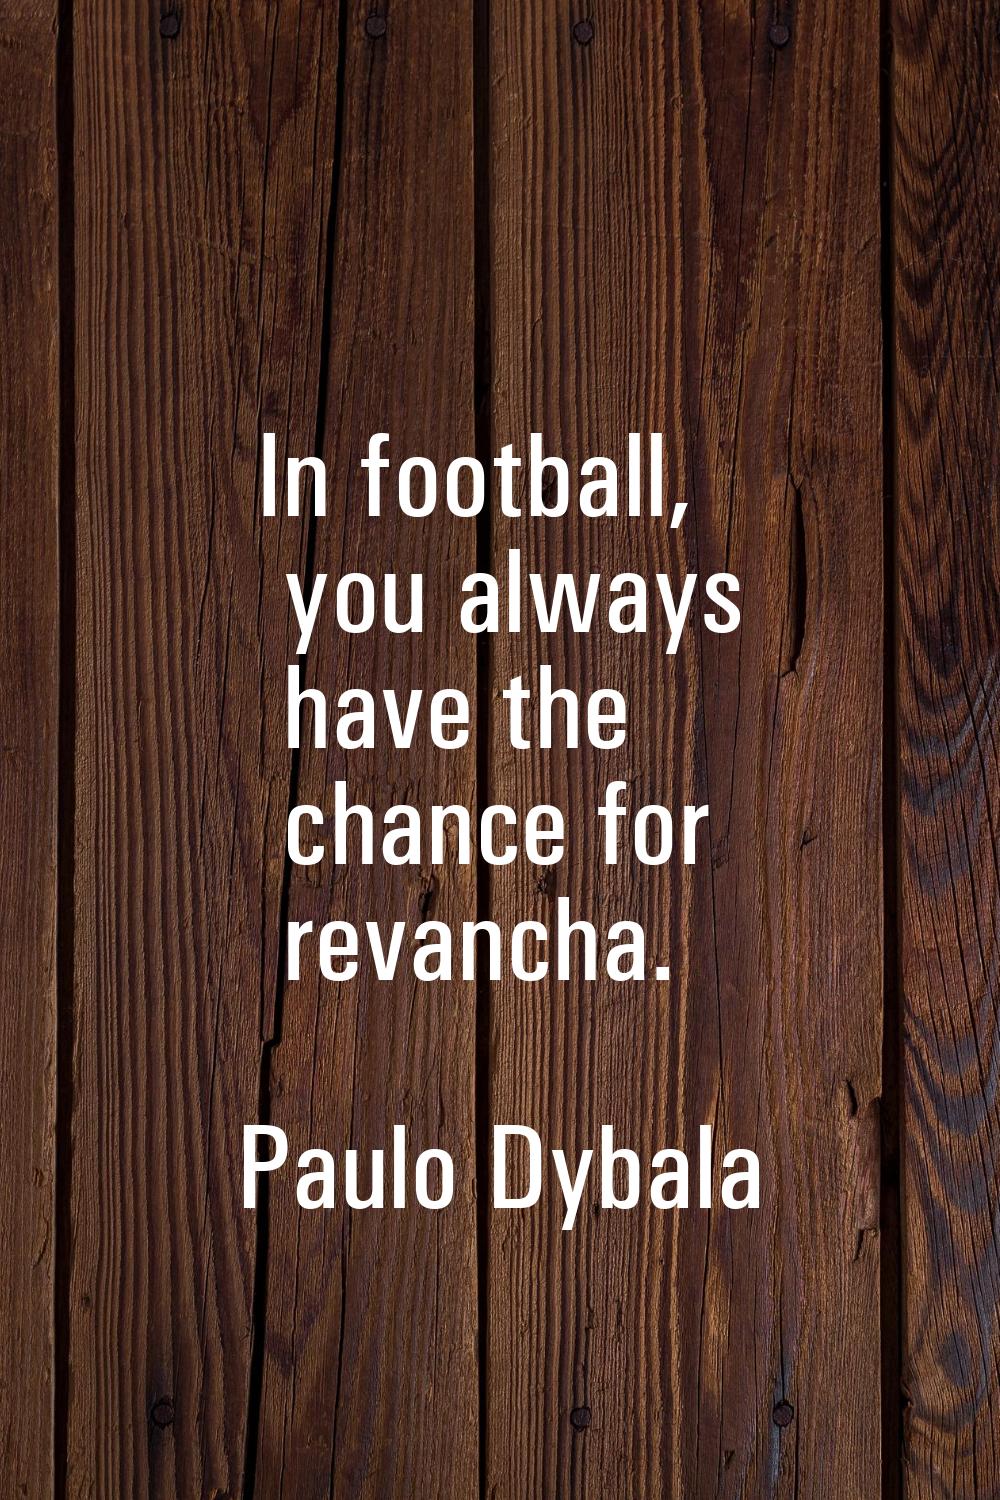 In football, you always have the chance for revancha.